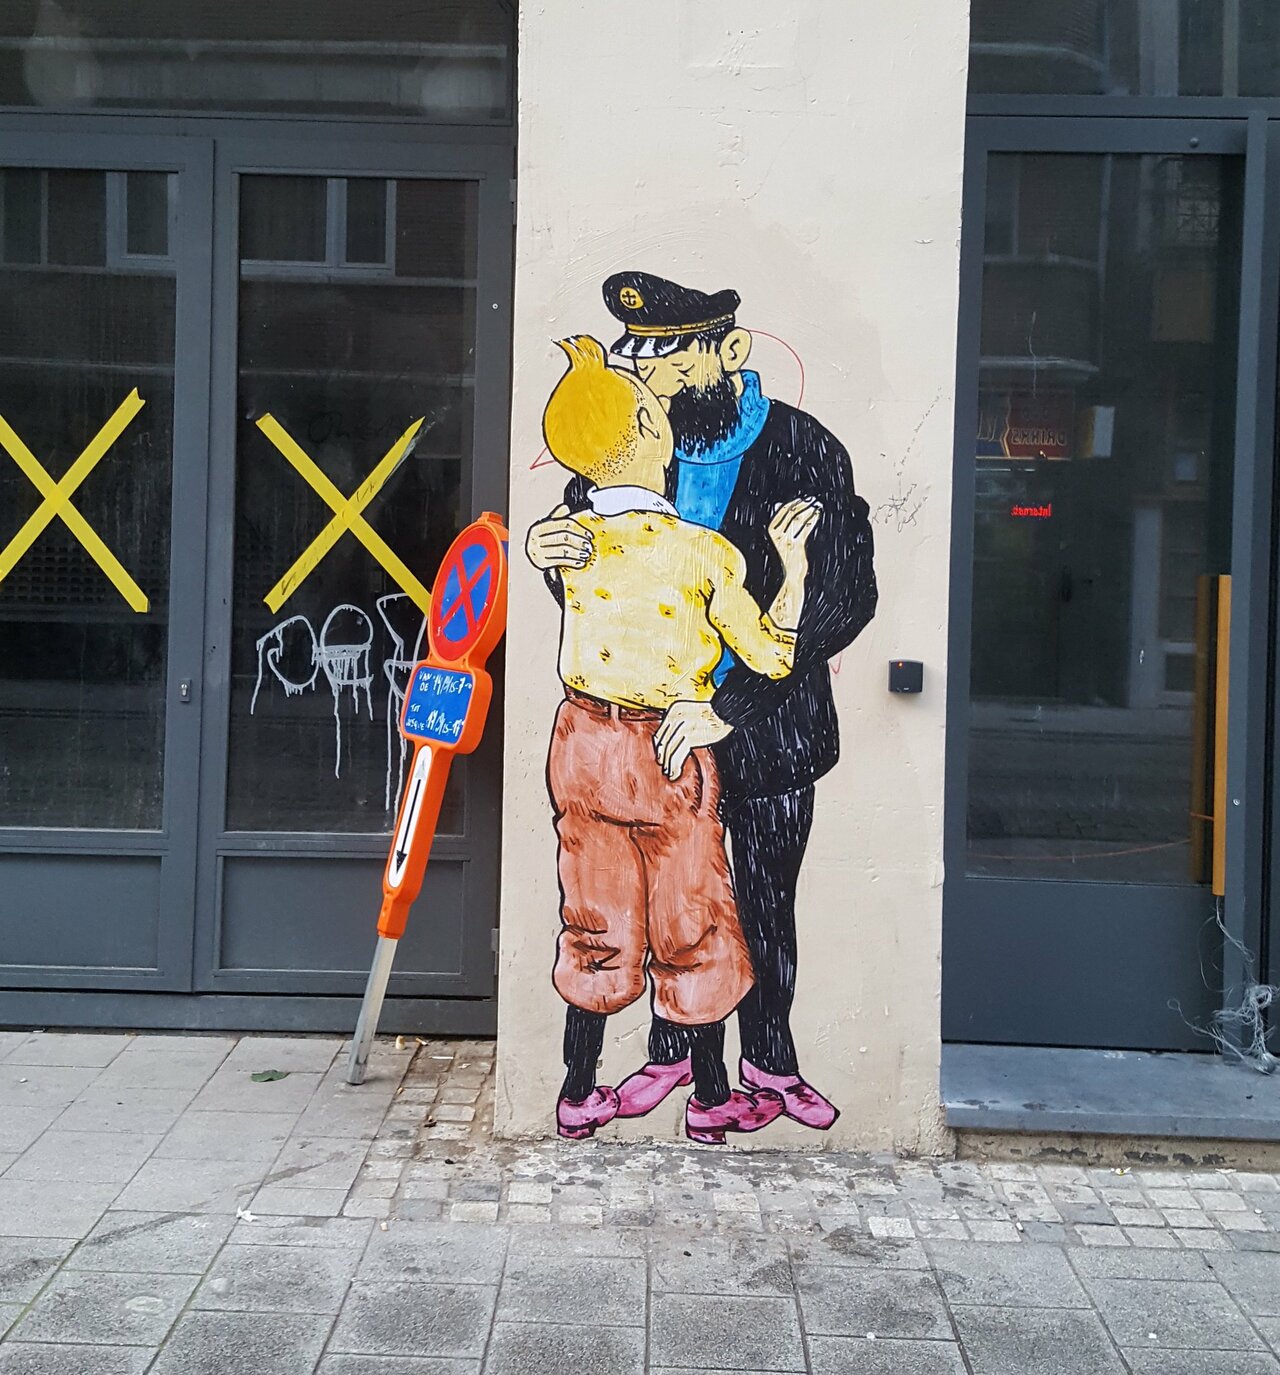 Tintin fait son coming out ! #Streetart #Brussels https://t.co/WaSSN9rG5l